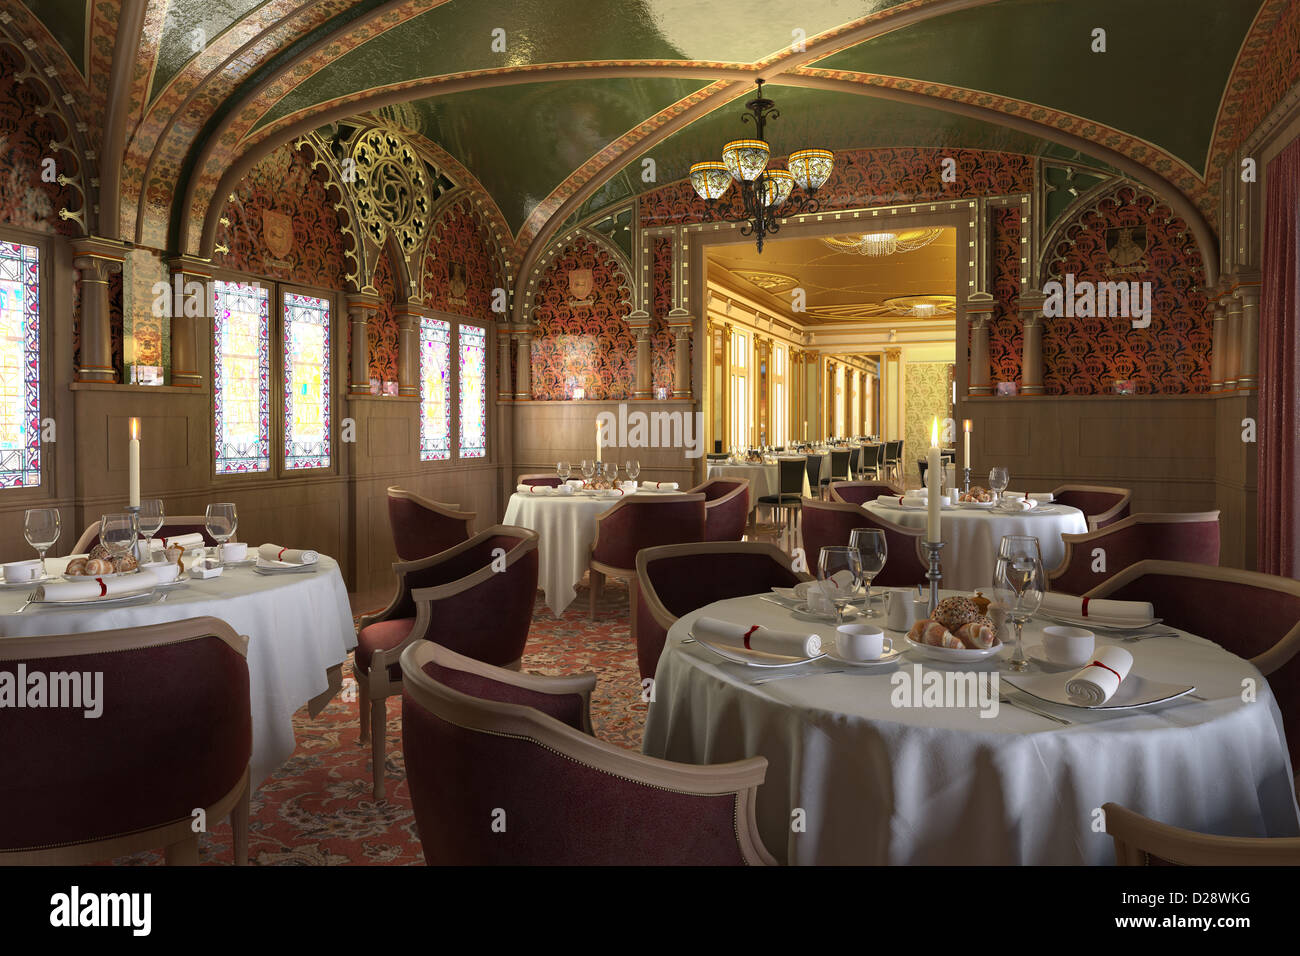 Old stylish antique restaurant interior, with decorations and set up tables. Stock Photo